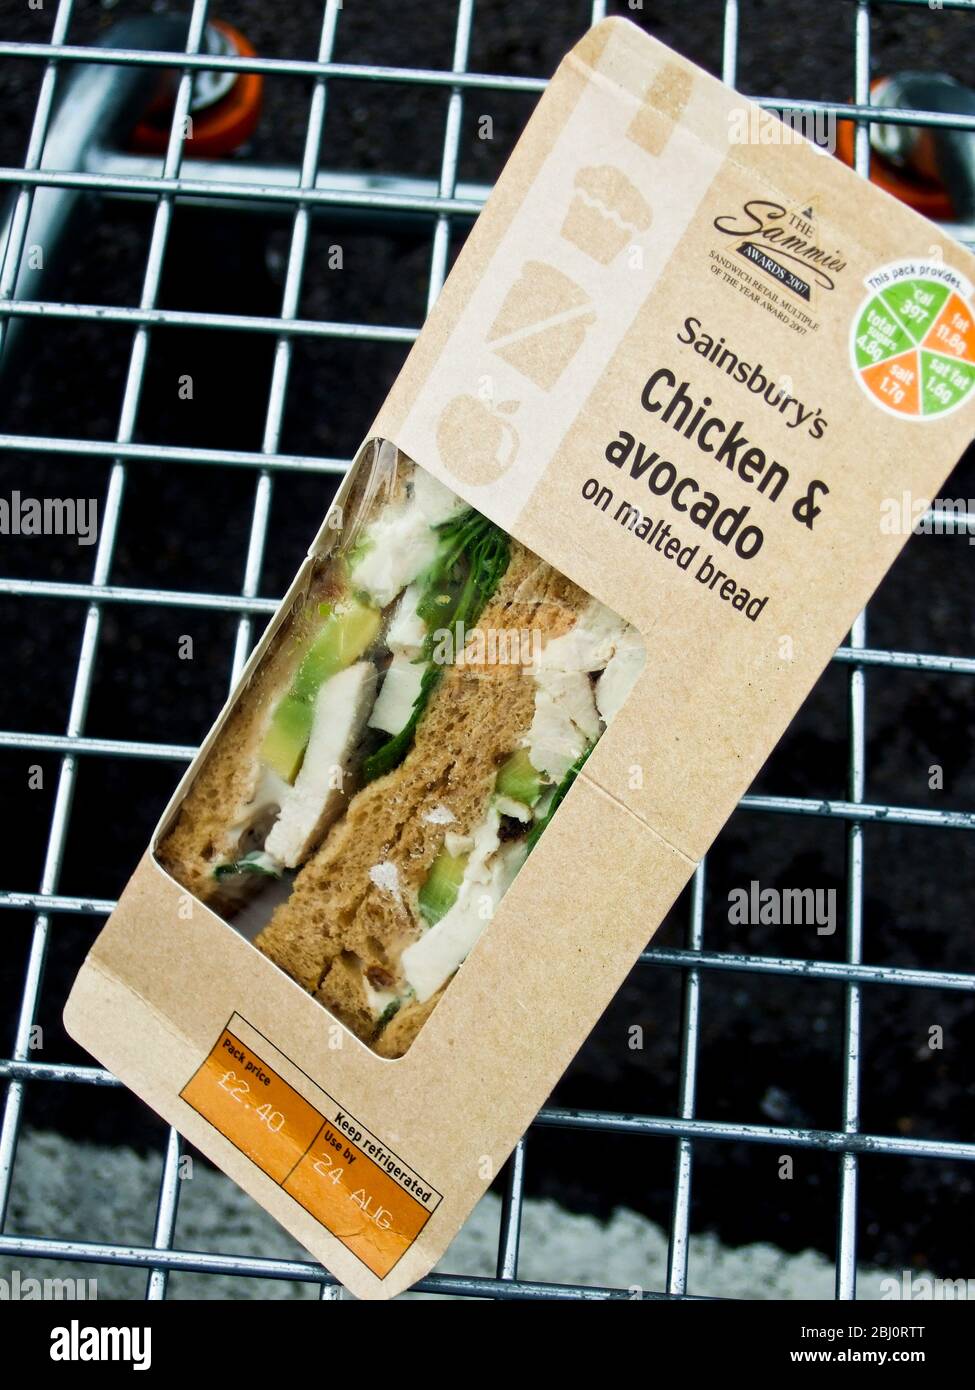 Packet of sandwiches bought in Sainsbury's in supermarket trolley - Stock Photo